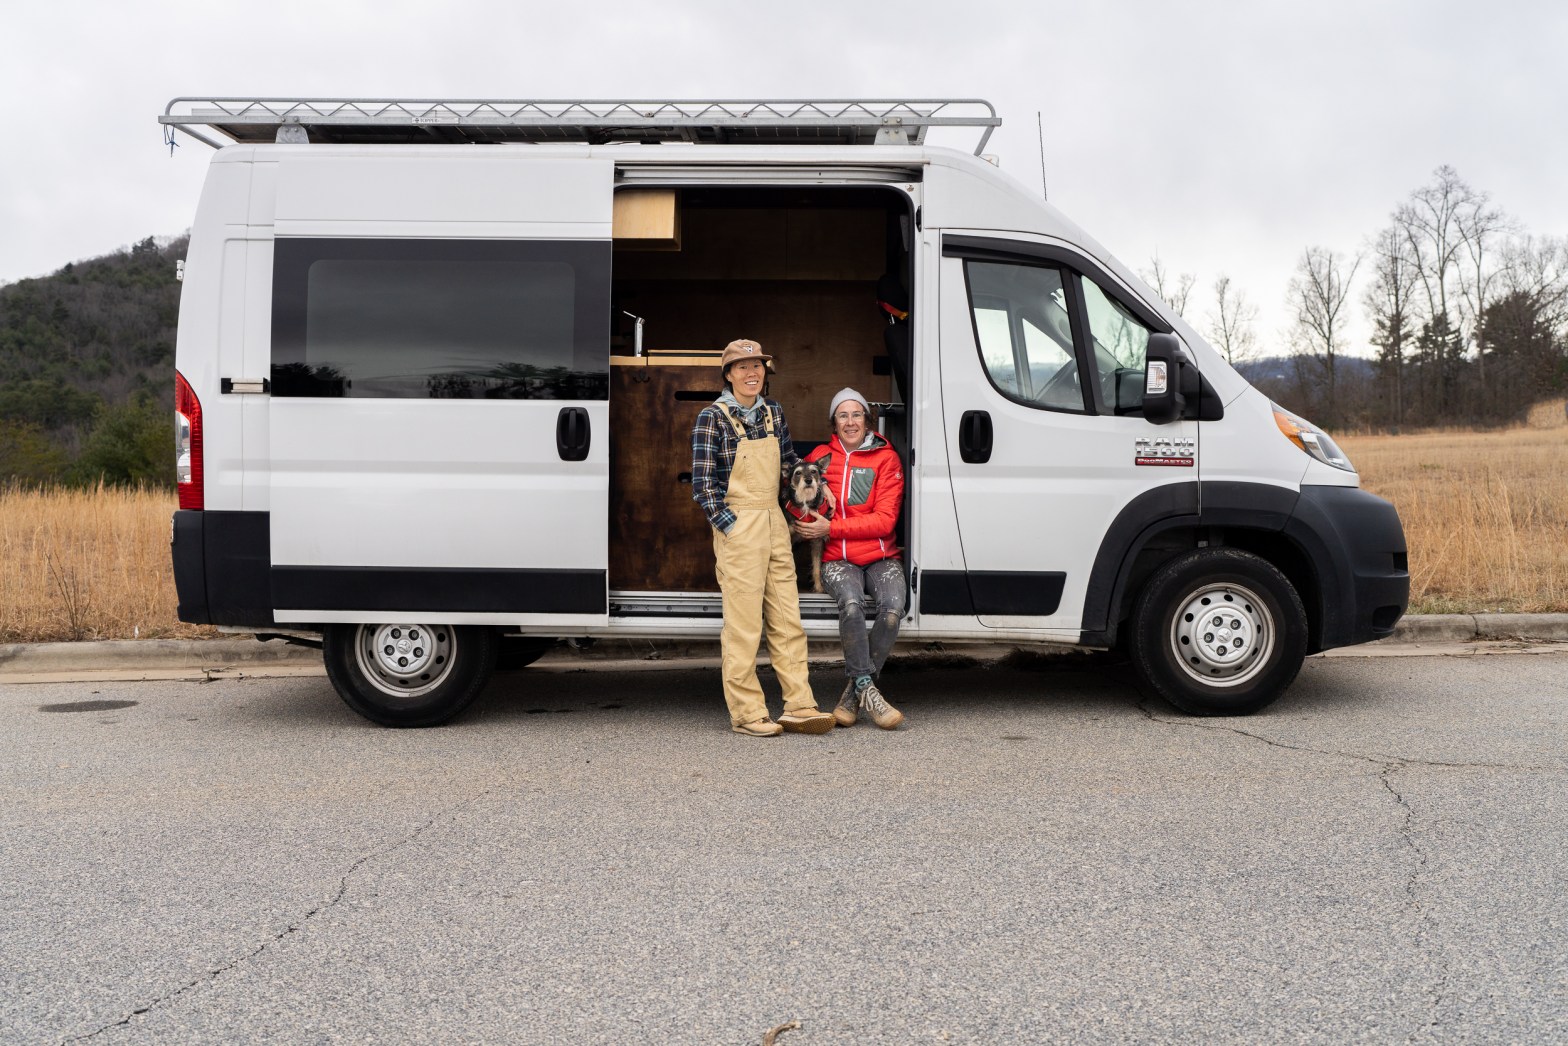 Erin McGrady stands in the doorway of an open white, tall, Ram Promaster camper van. Next to her is a cute brown dog with white fur around it's mouth and eyebrows. On the other side of the dog, with her hand around the dog is Caroline Whatley. In the background is a wintry looking scene with a mountain and golden grass.